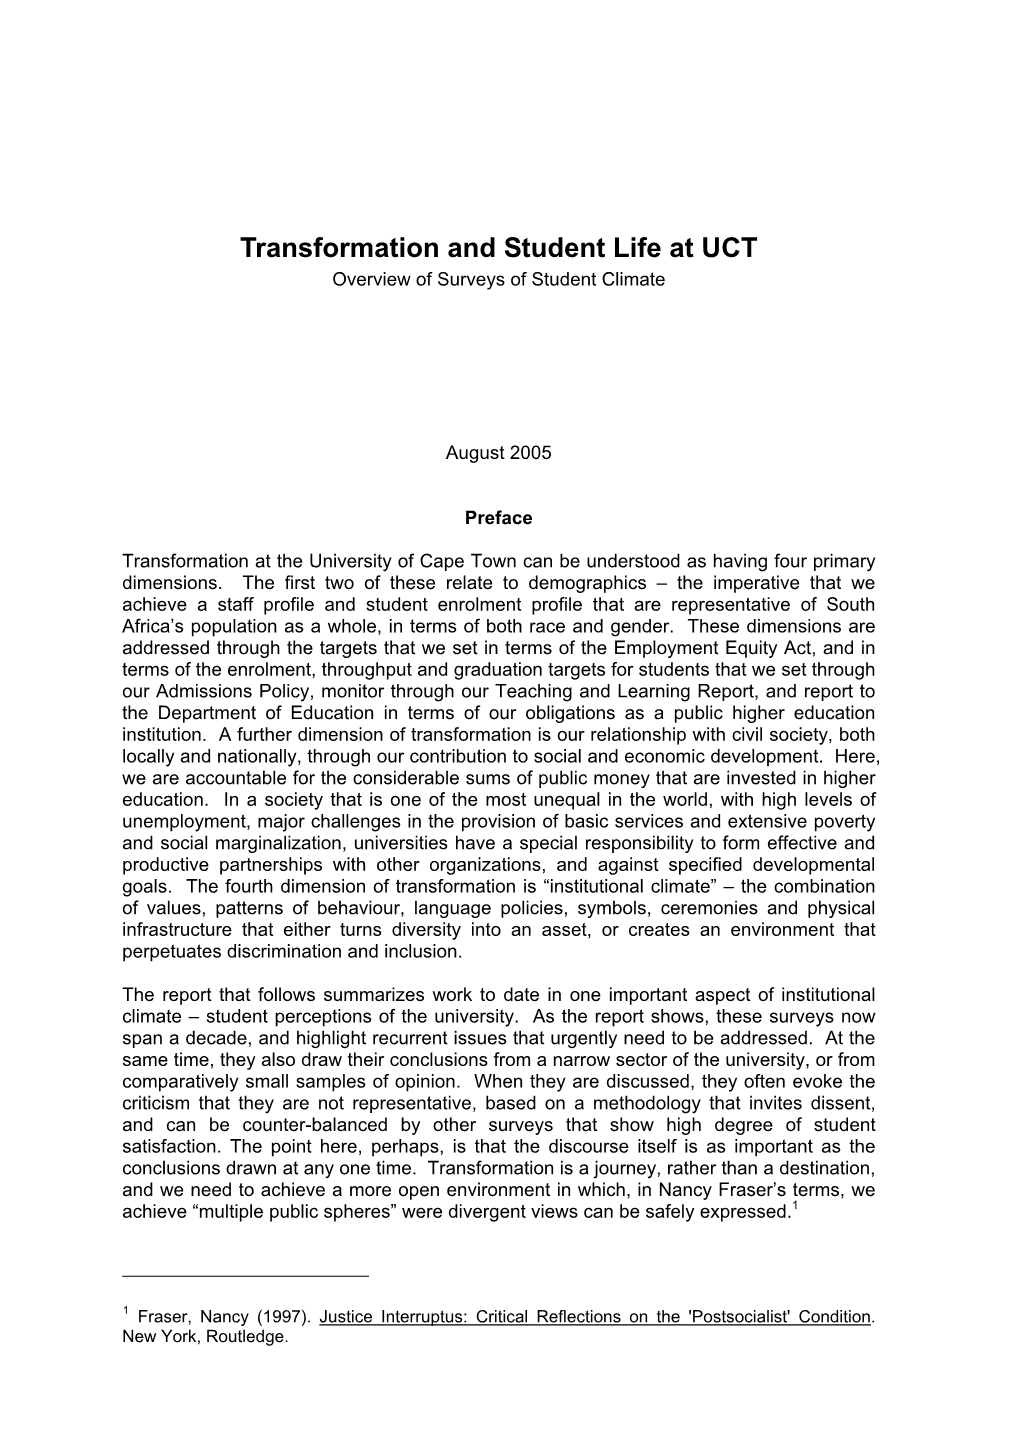 Transformation and Student Life at UCT Overview of Surveys of Student Climate